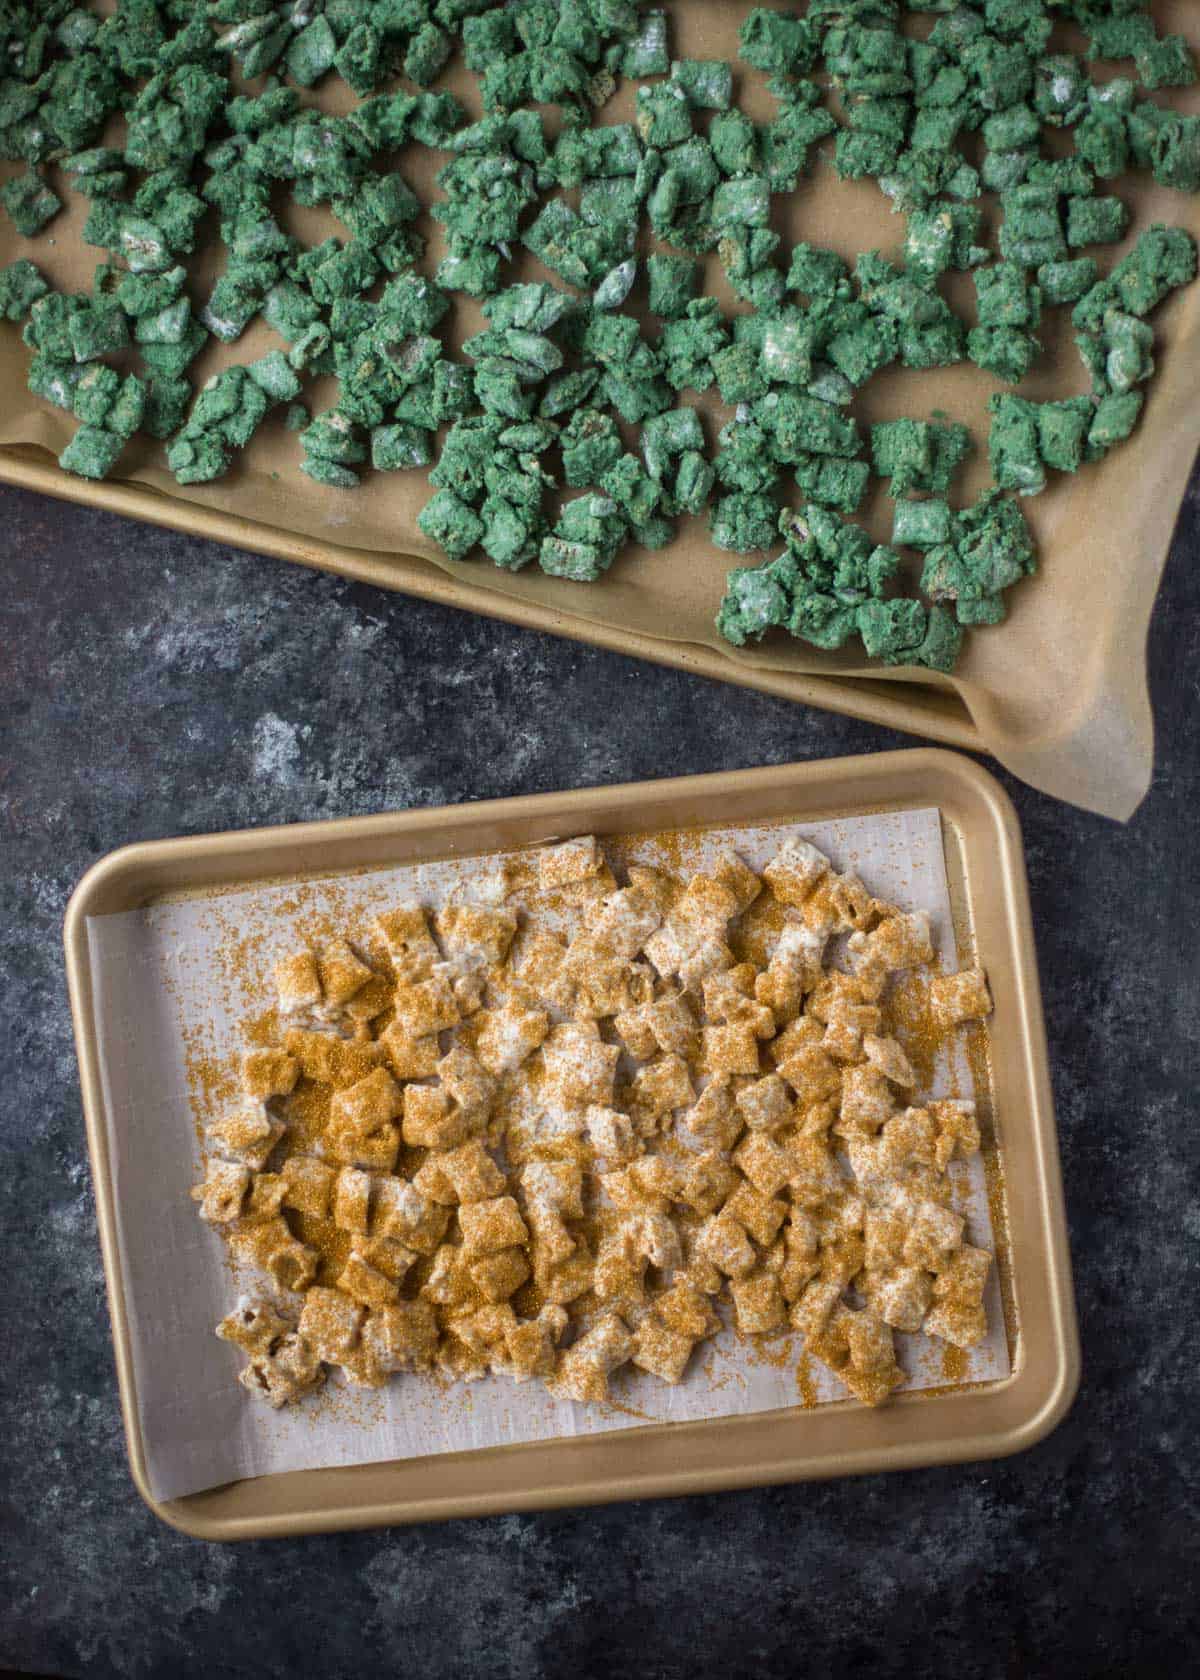 green and gold puppy chow on sheet pans